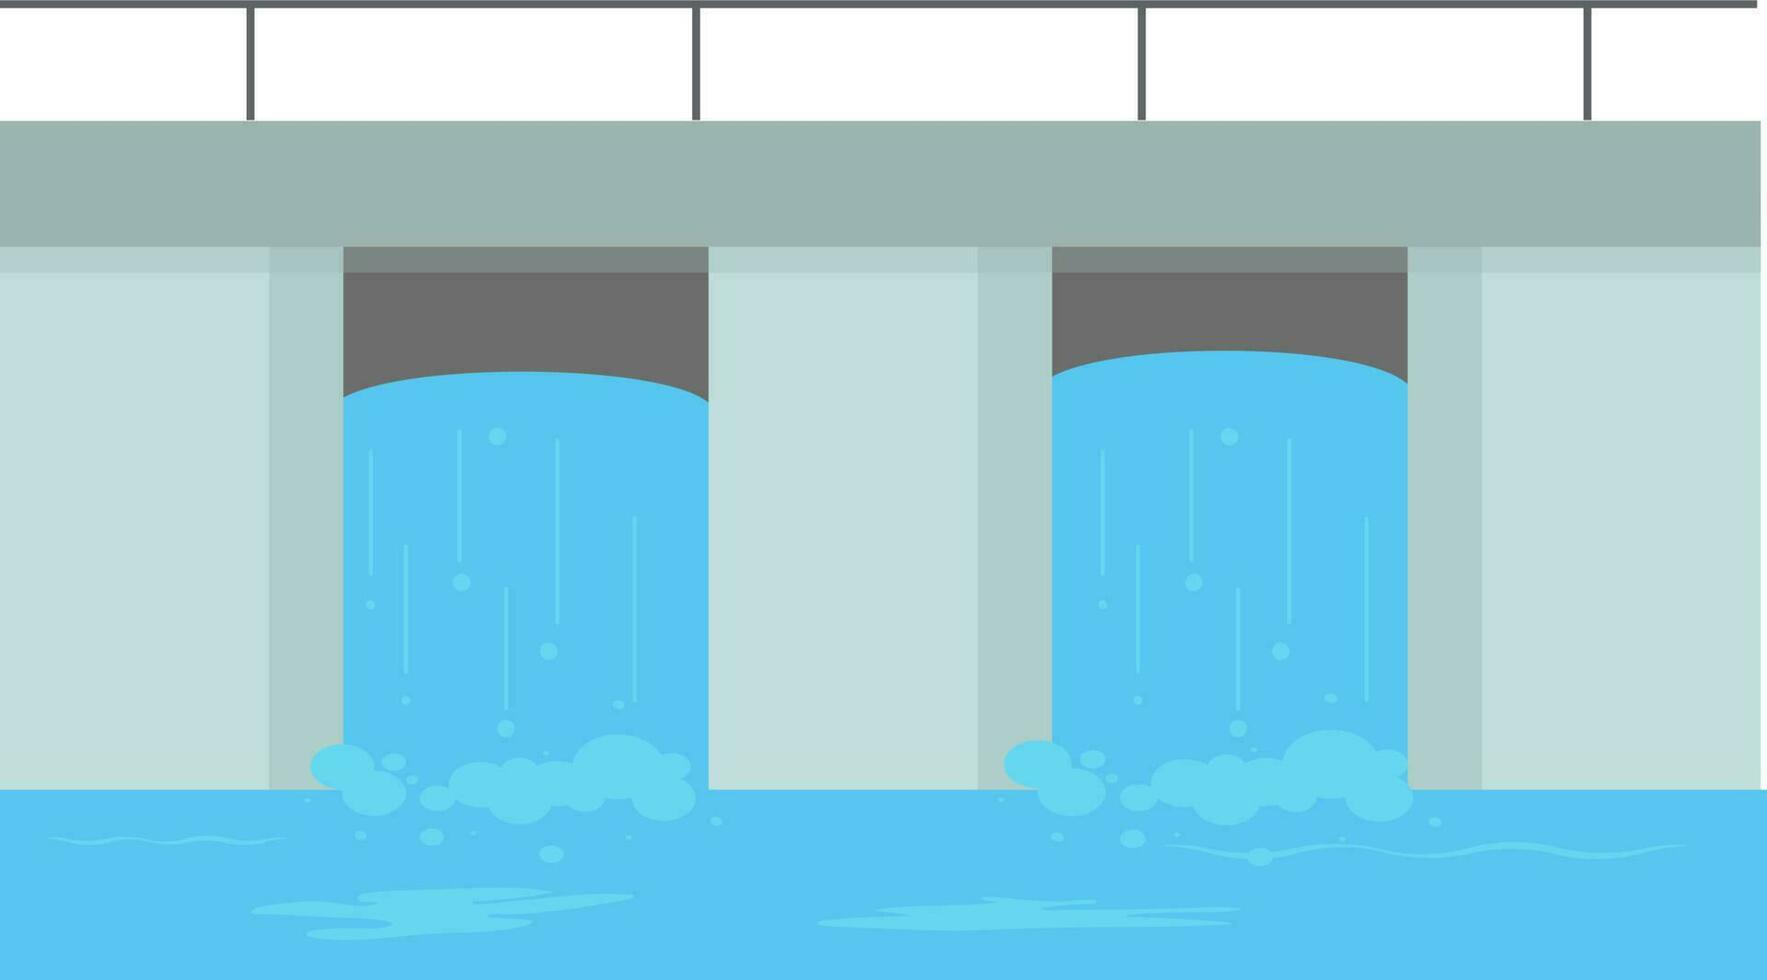 Illustration Of Bridge Over River Element In Blue And Gray Color. vector